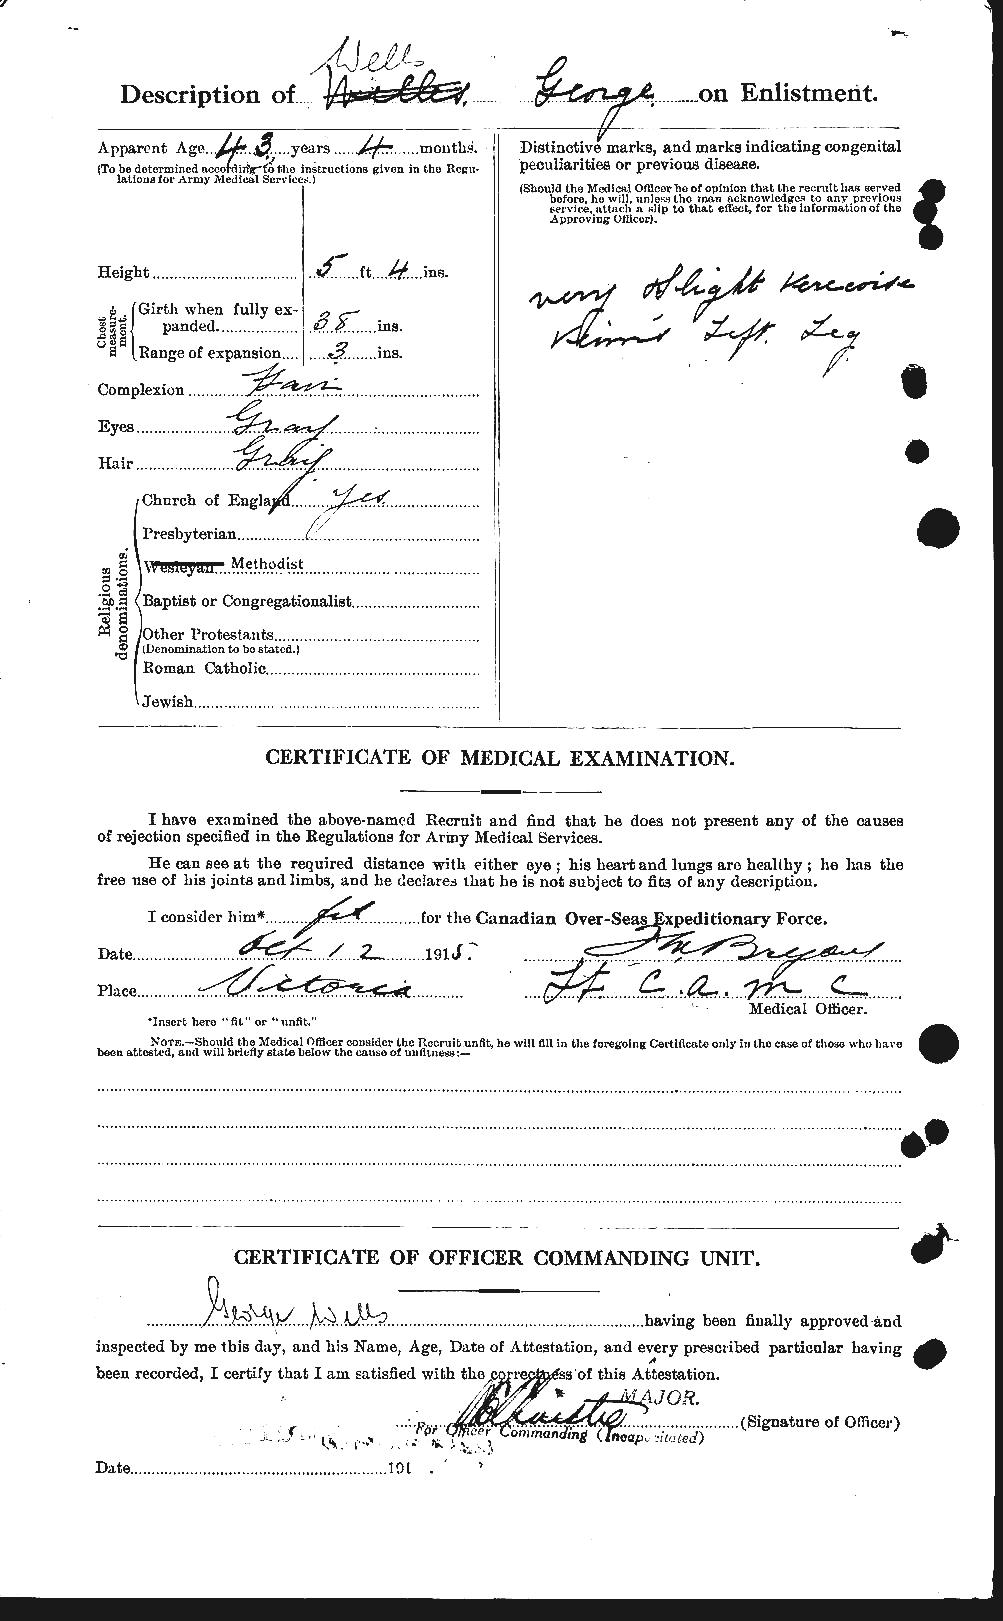 Personnel Records of the First World War - CEF 665127b